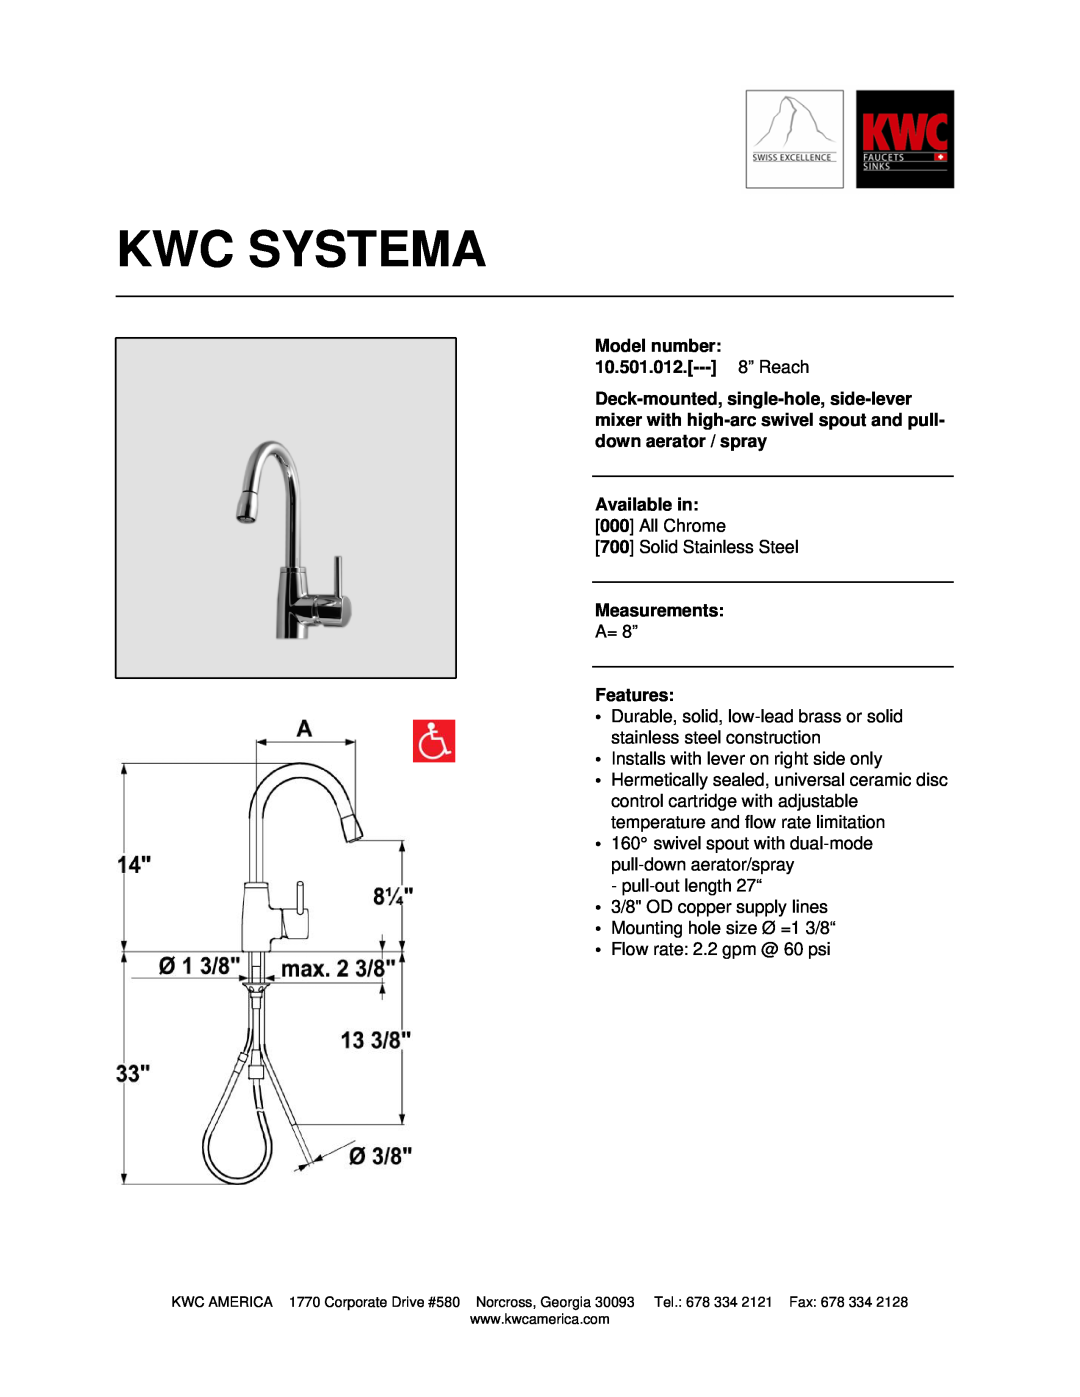 KWC manual Kwc Systema, Model number 10.501.012.--- 8” Reach, Available in, Measurements, Features 